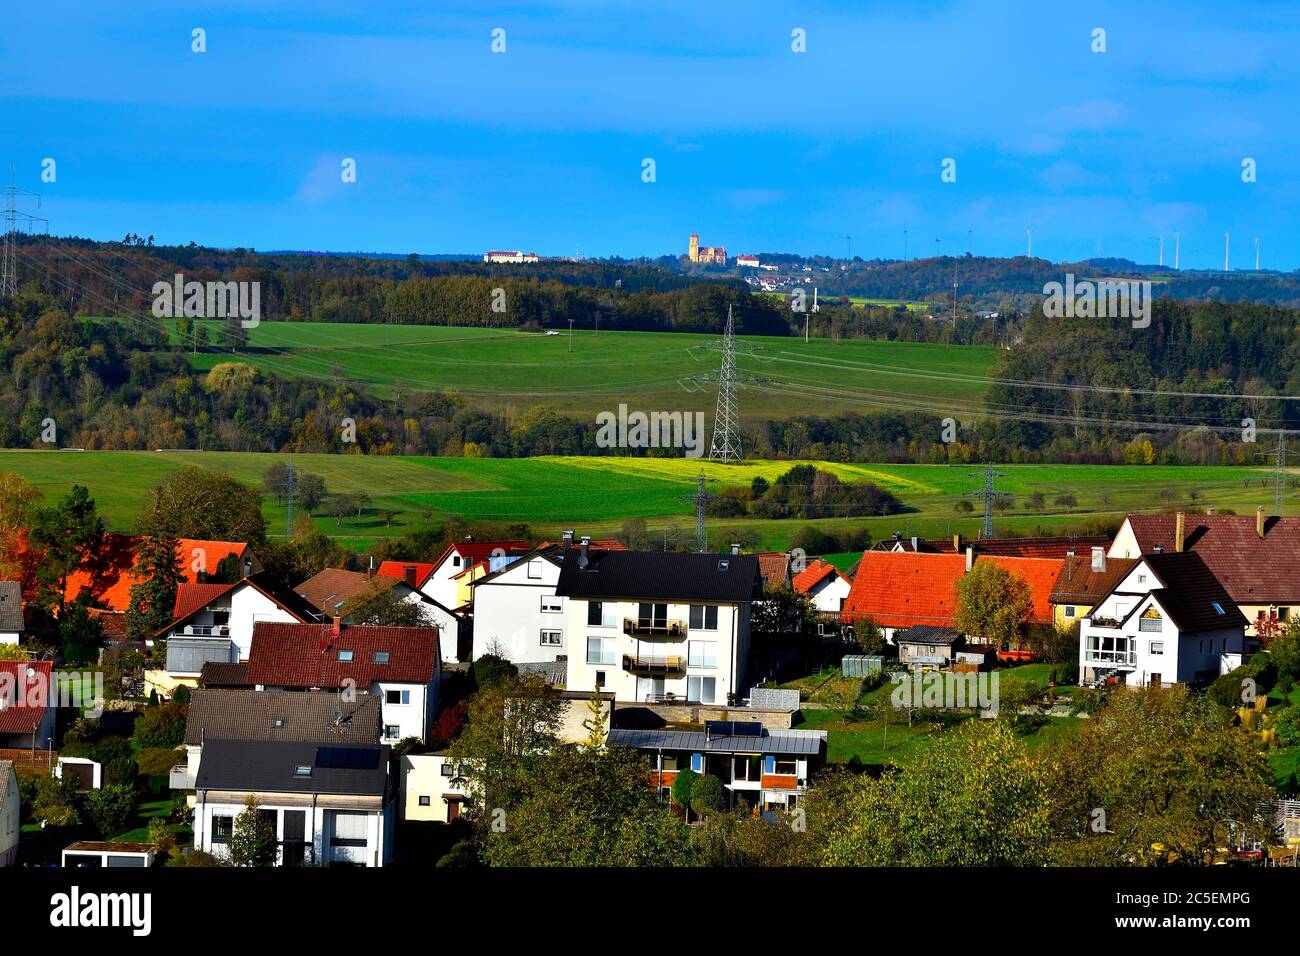 City of Aalen-Wasseralfingen in The Hilly Landscape of The Swabian Alb, Medieval Castle and Monastery of Ellwangen in The Background, Germany, Europe Stock Photo